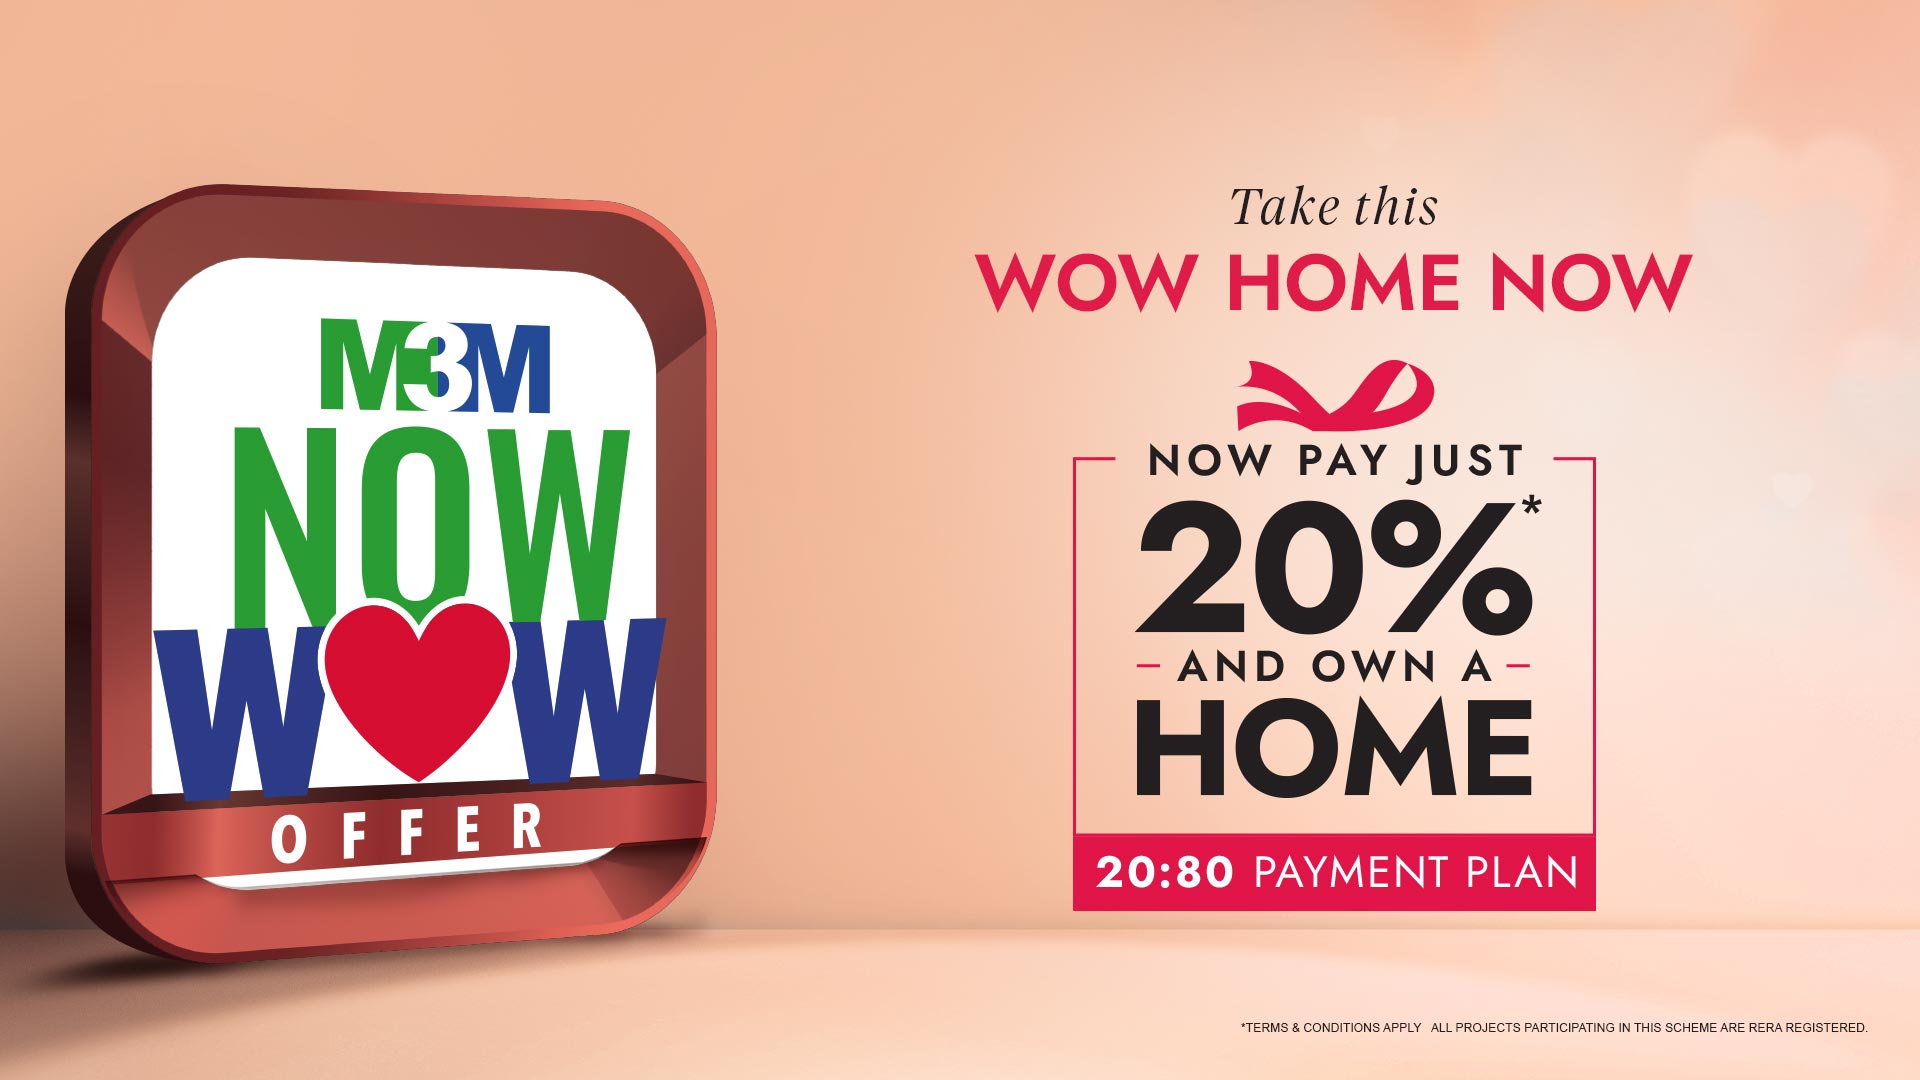 m3m now wow t20 offer gurgaon